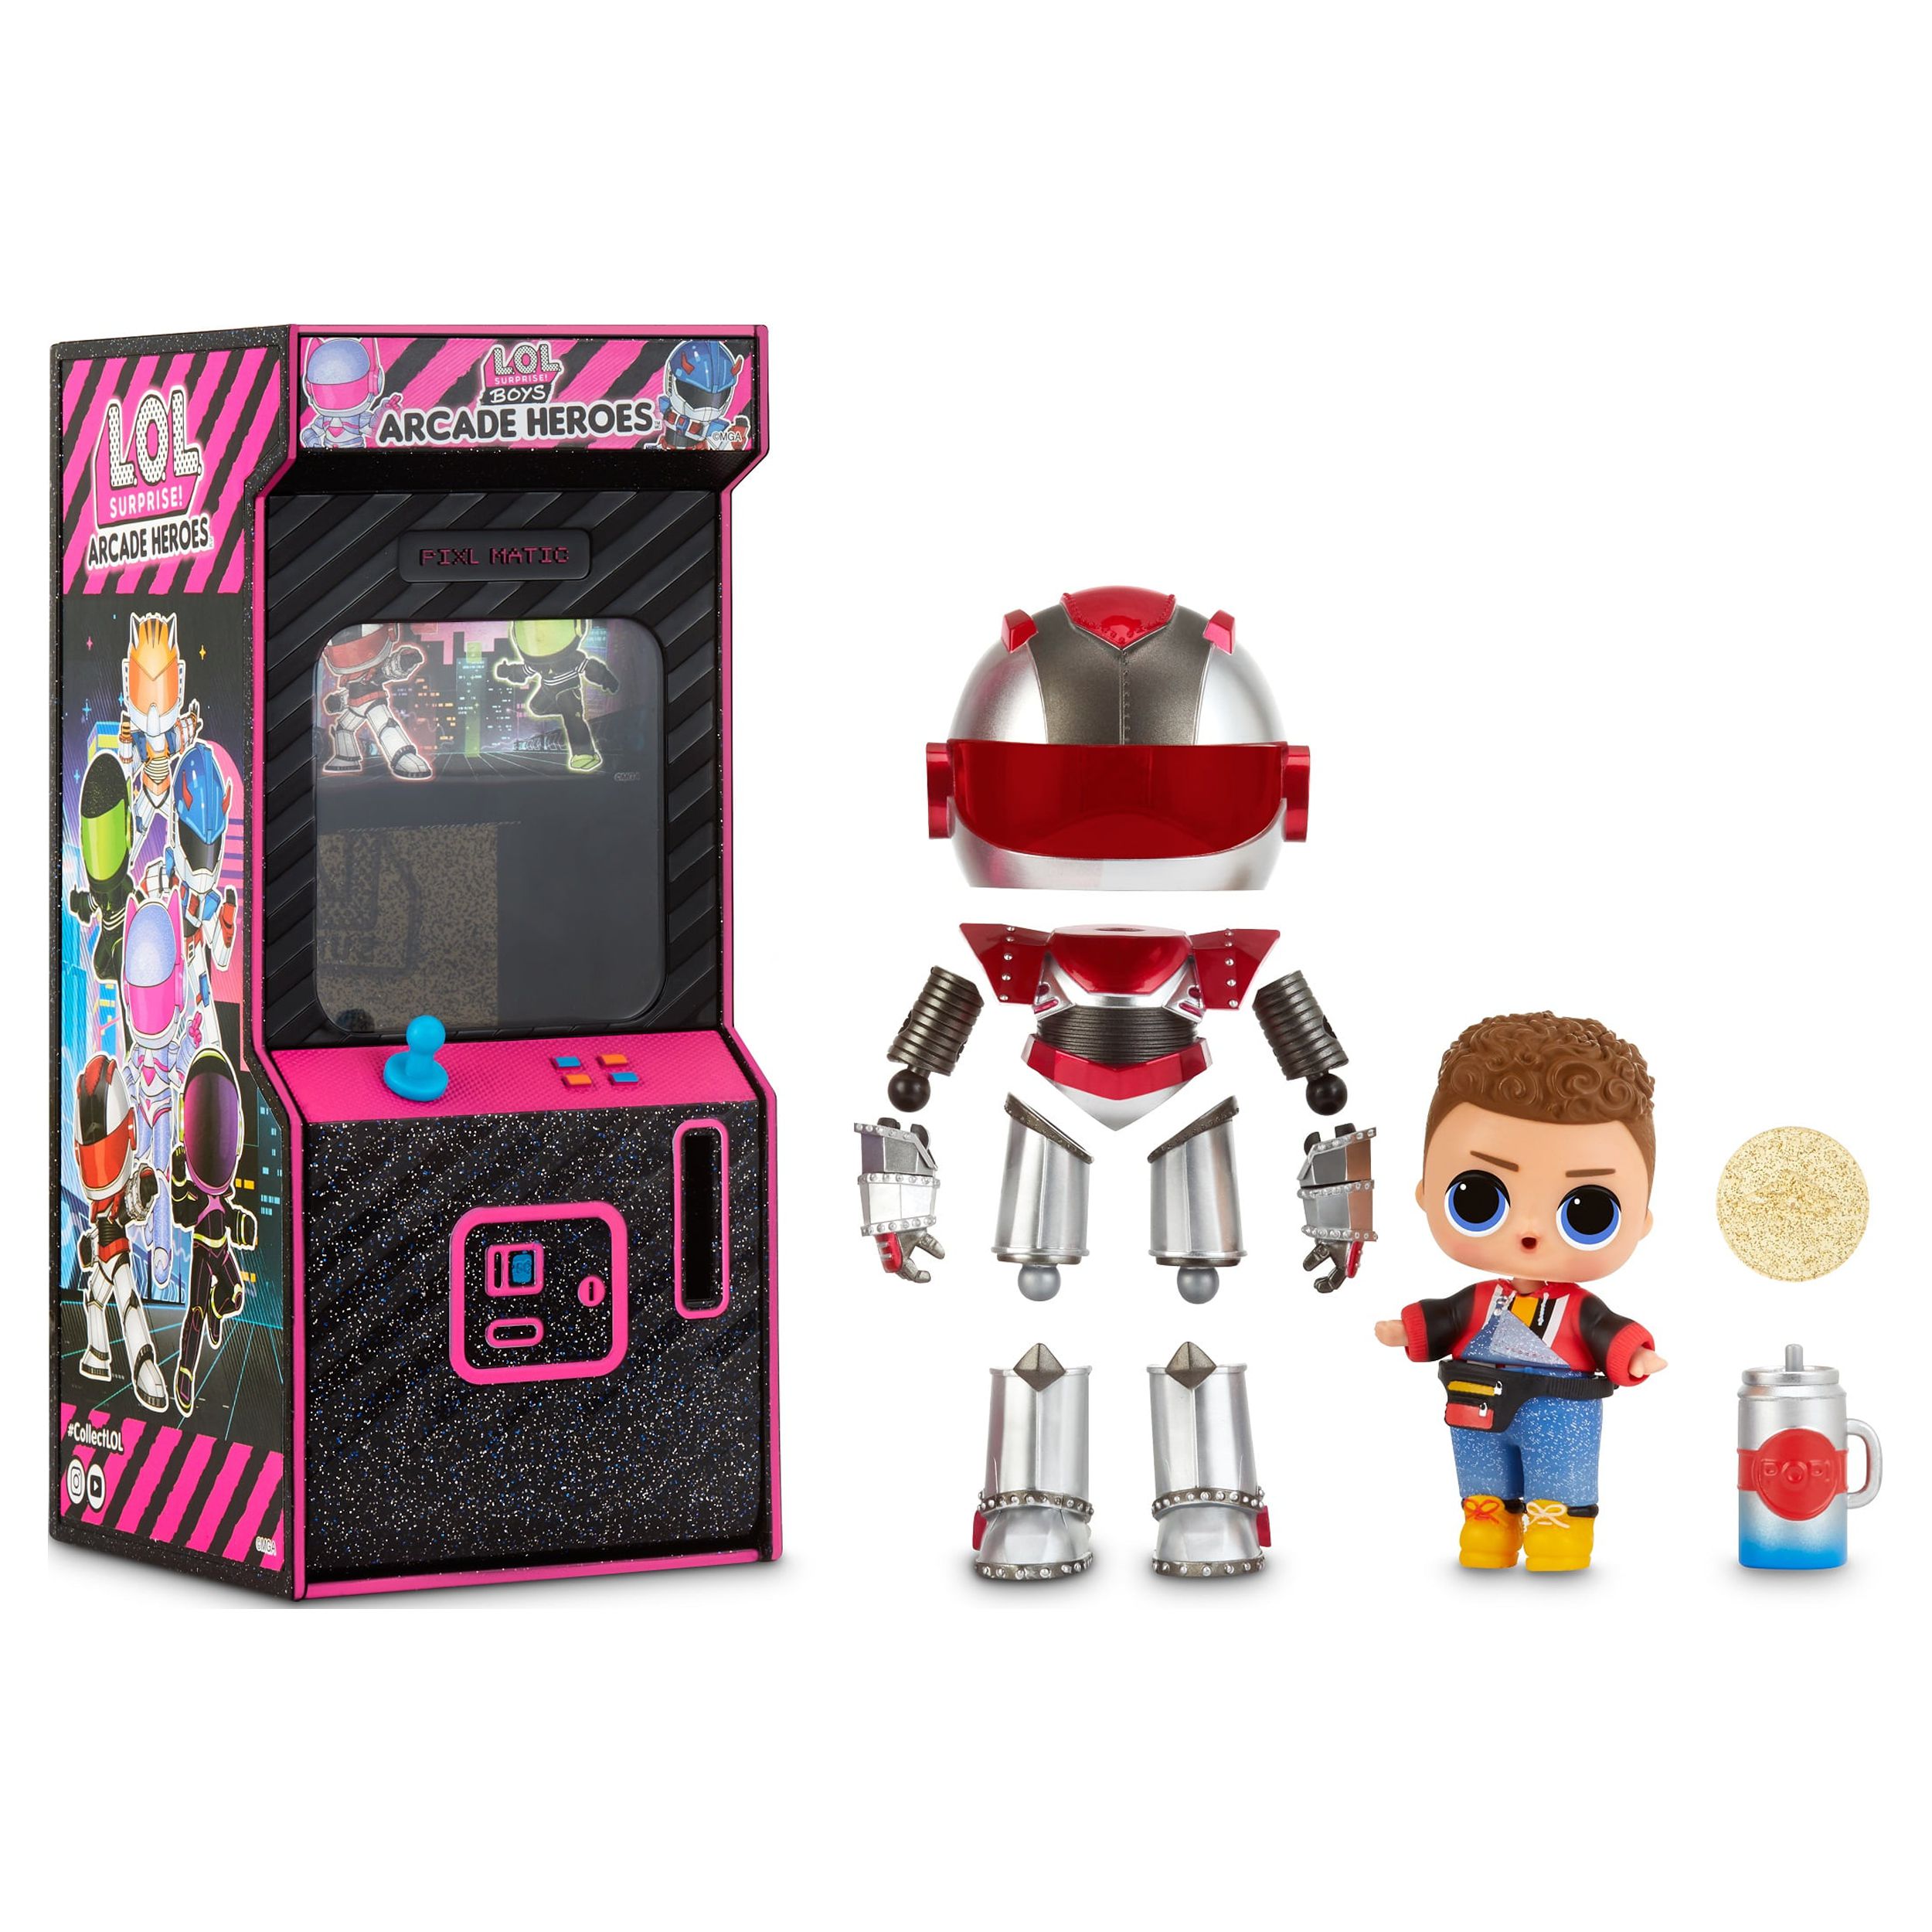 LOL Surprise Boys Arcade Heroes – Action Figure Doll With 15 Surprises, Great Gift for Kids Ages 4 5 6+ - image 1 of 7